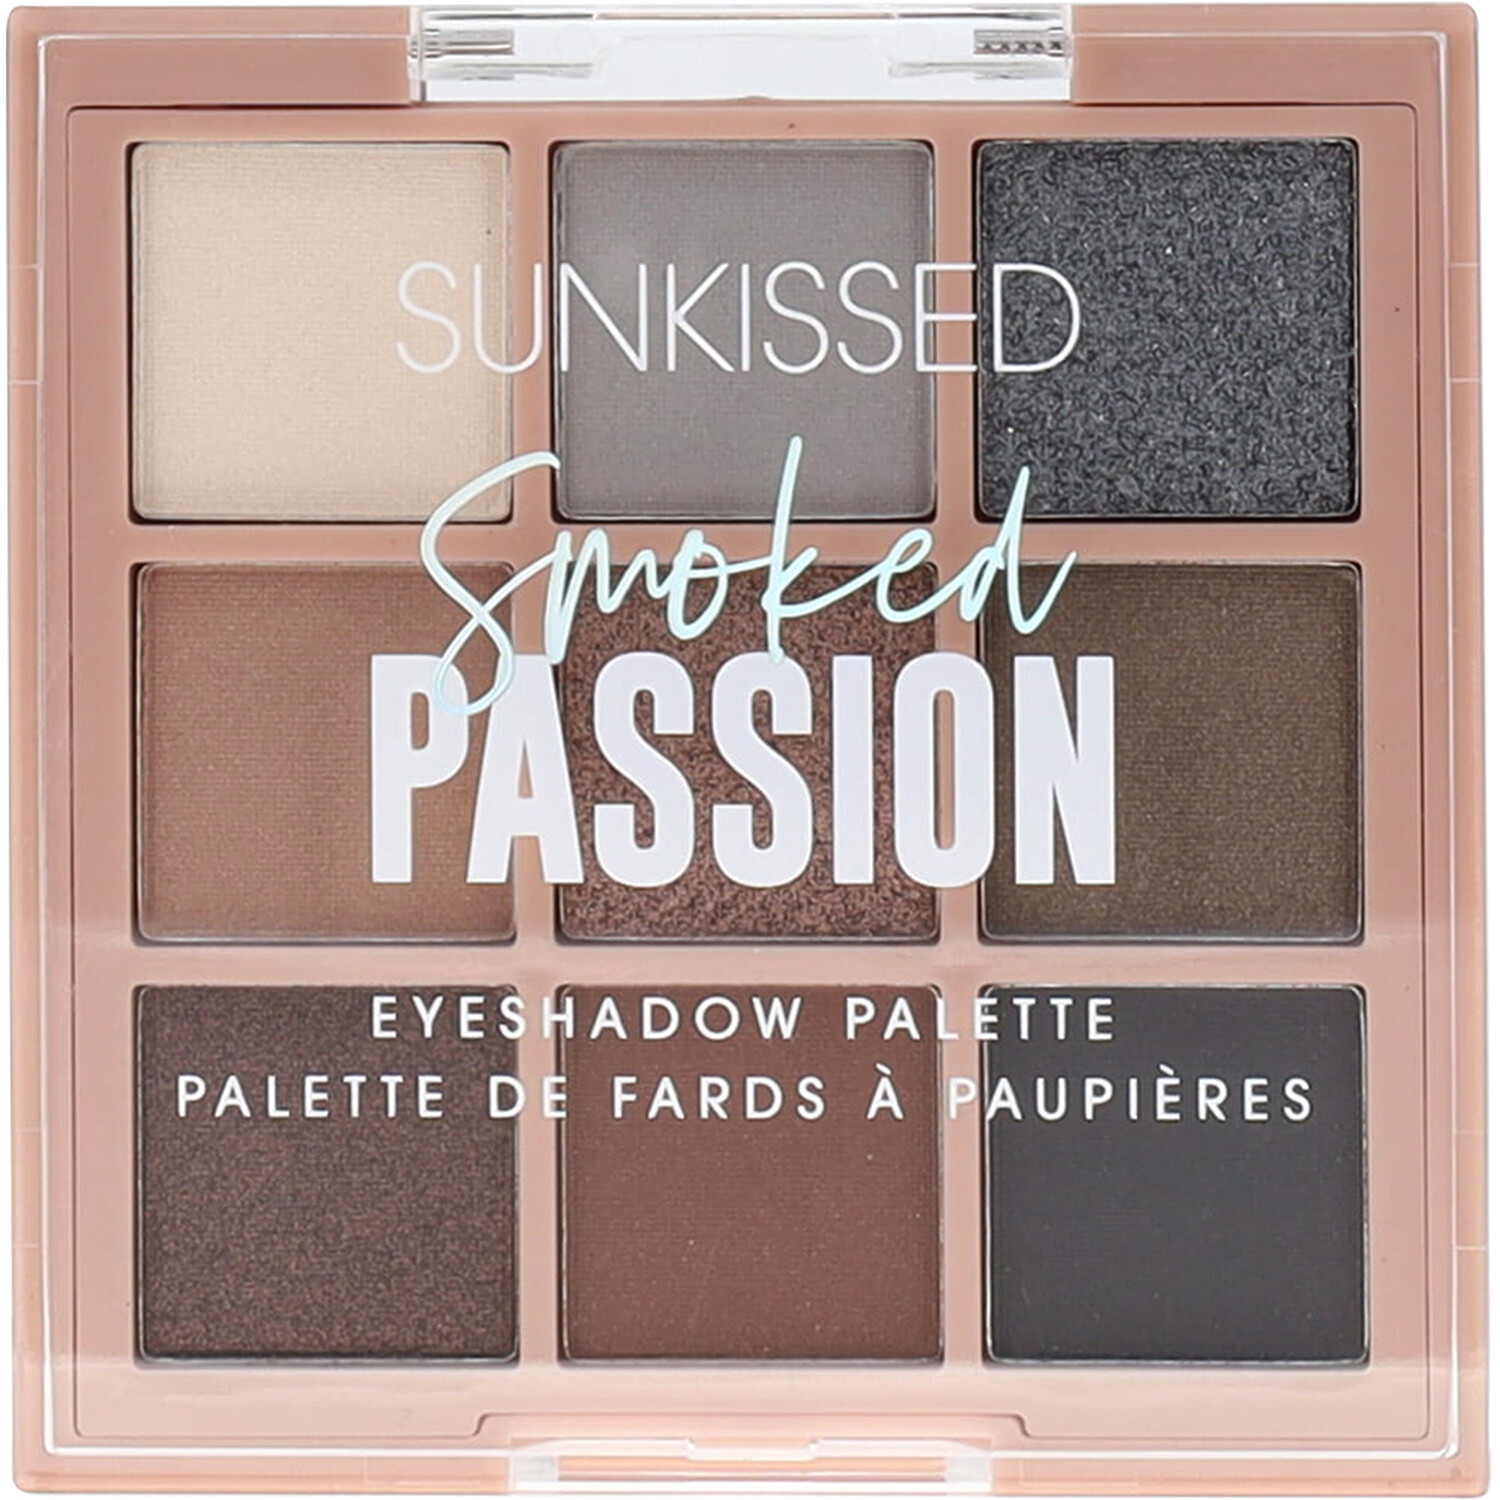 Sunkissed Smoked Passion Eyeshadow Palette - Brown Image